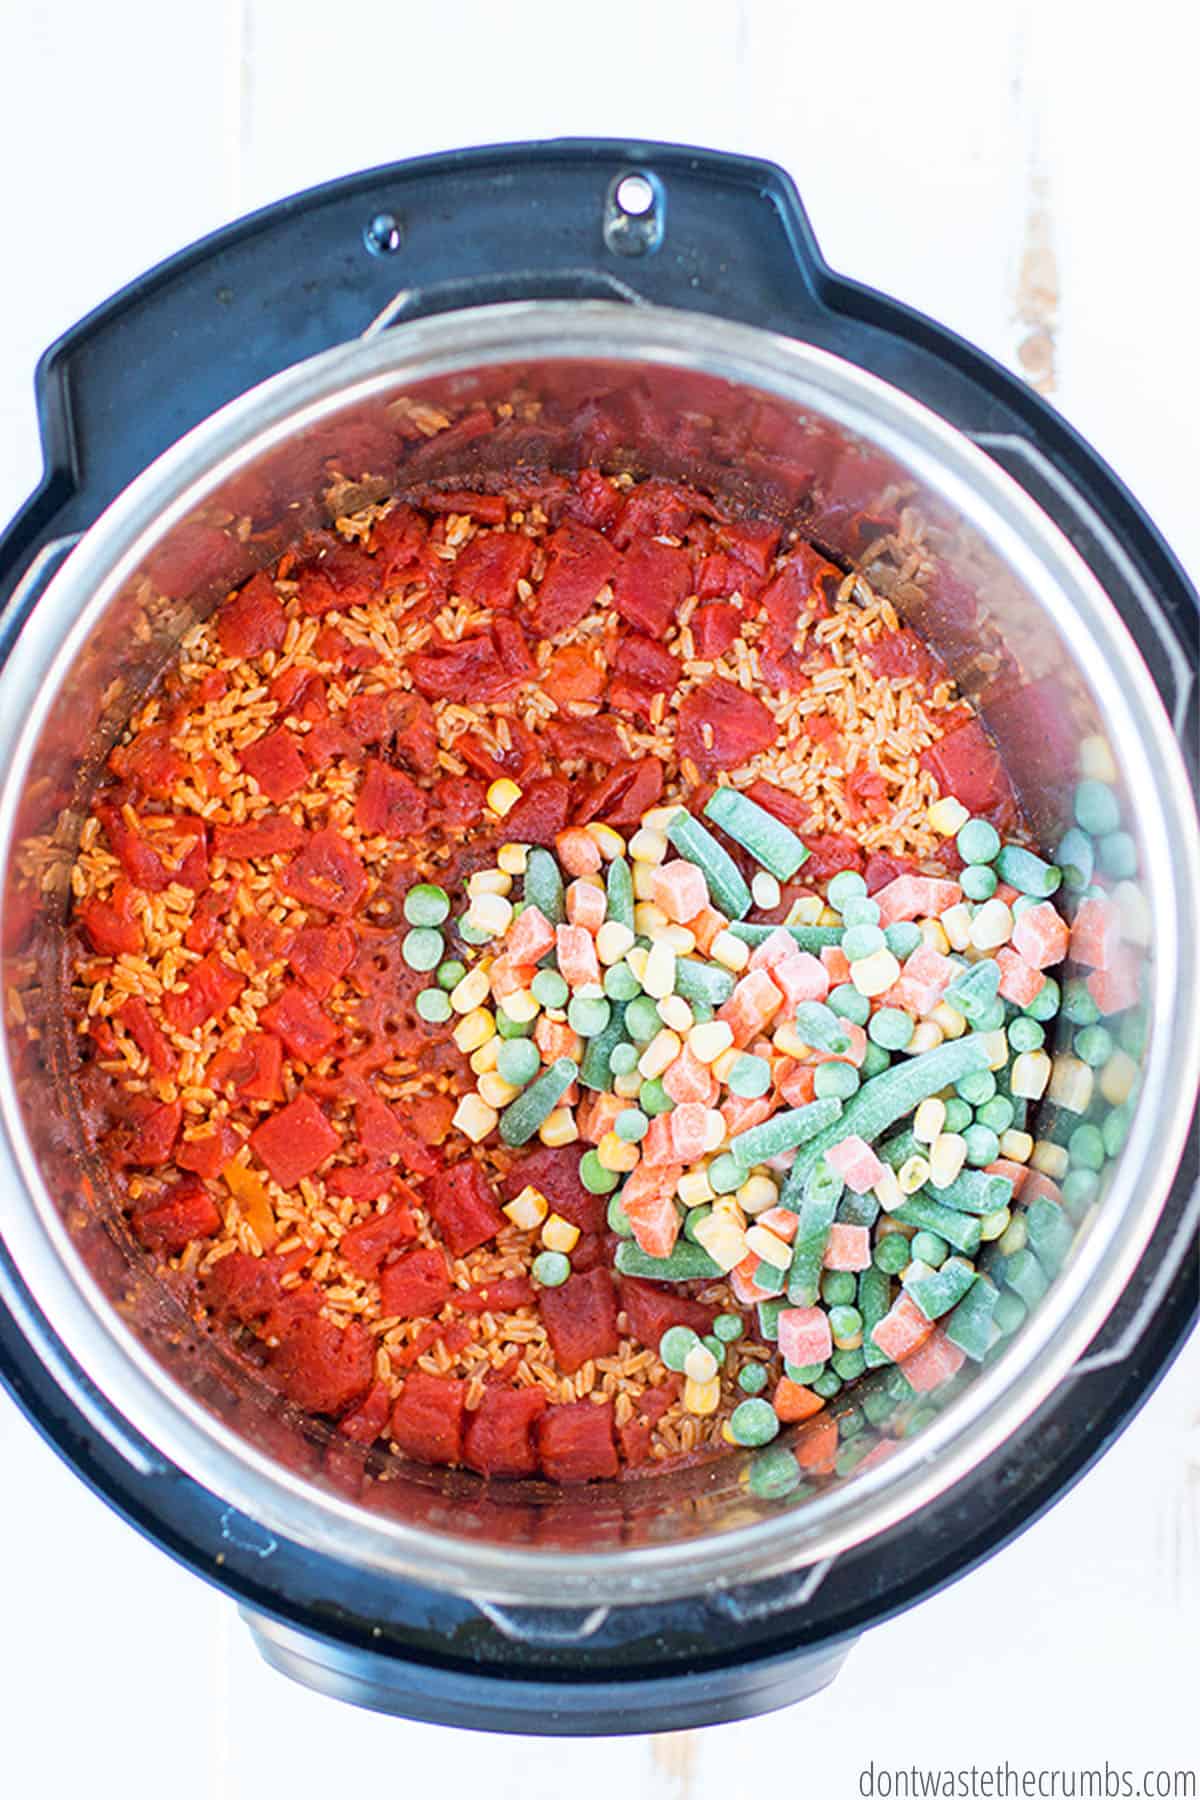 Frozen vegetables are added to the cooked rice in the Instant Pot.